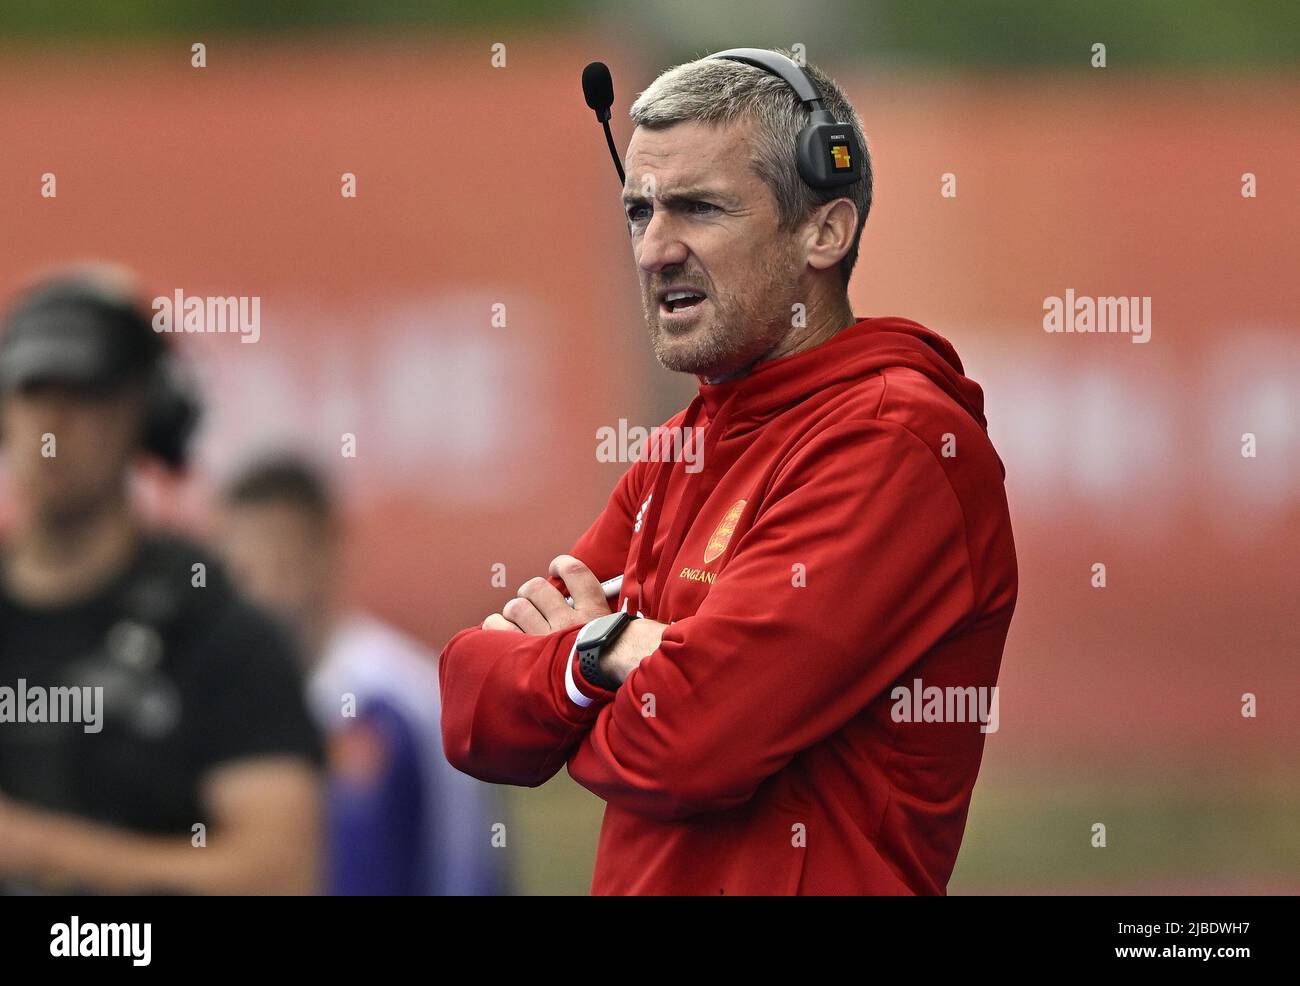 Stratford, United Kingdom. 05th June, 2022. England V Netherlands Womens FIH Pro League. Lee Valley Hockey centre. Stratford. England coach David Ralph during the England V Netherlands Womens FIH Pro League hockey match. Credit: Sport In Pictures/Alamy Live News Stock Photo